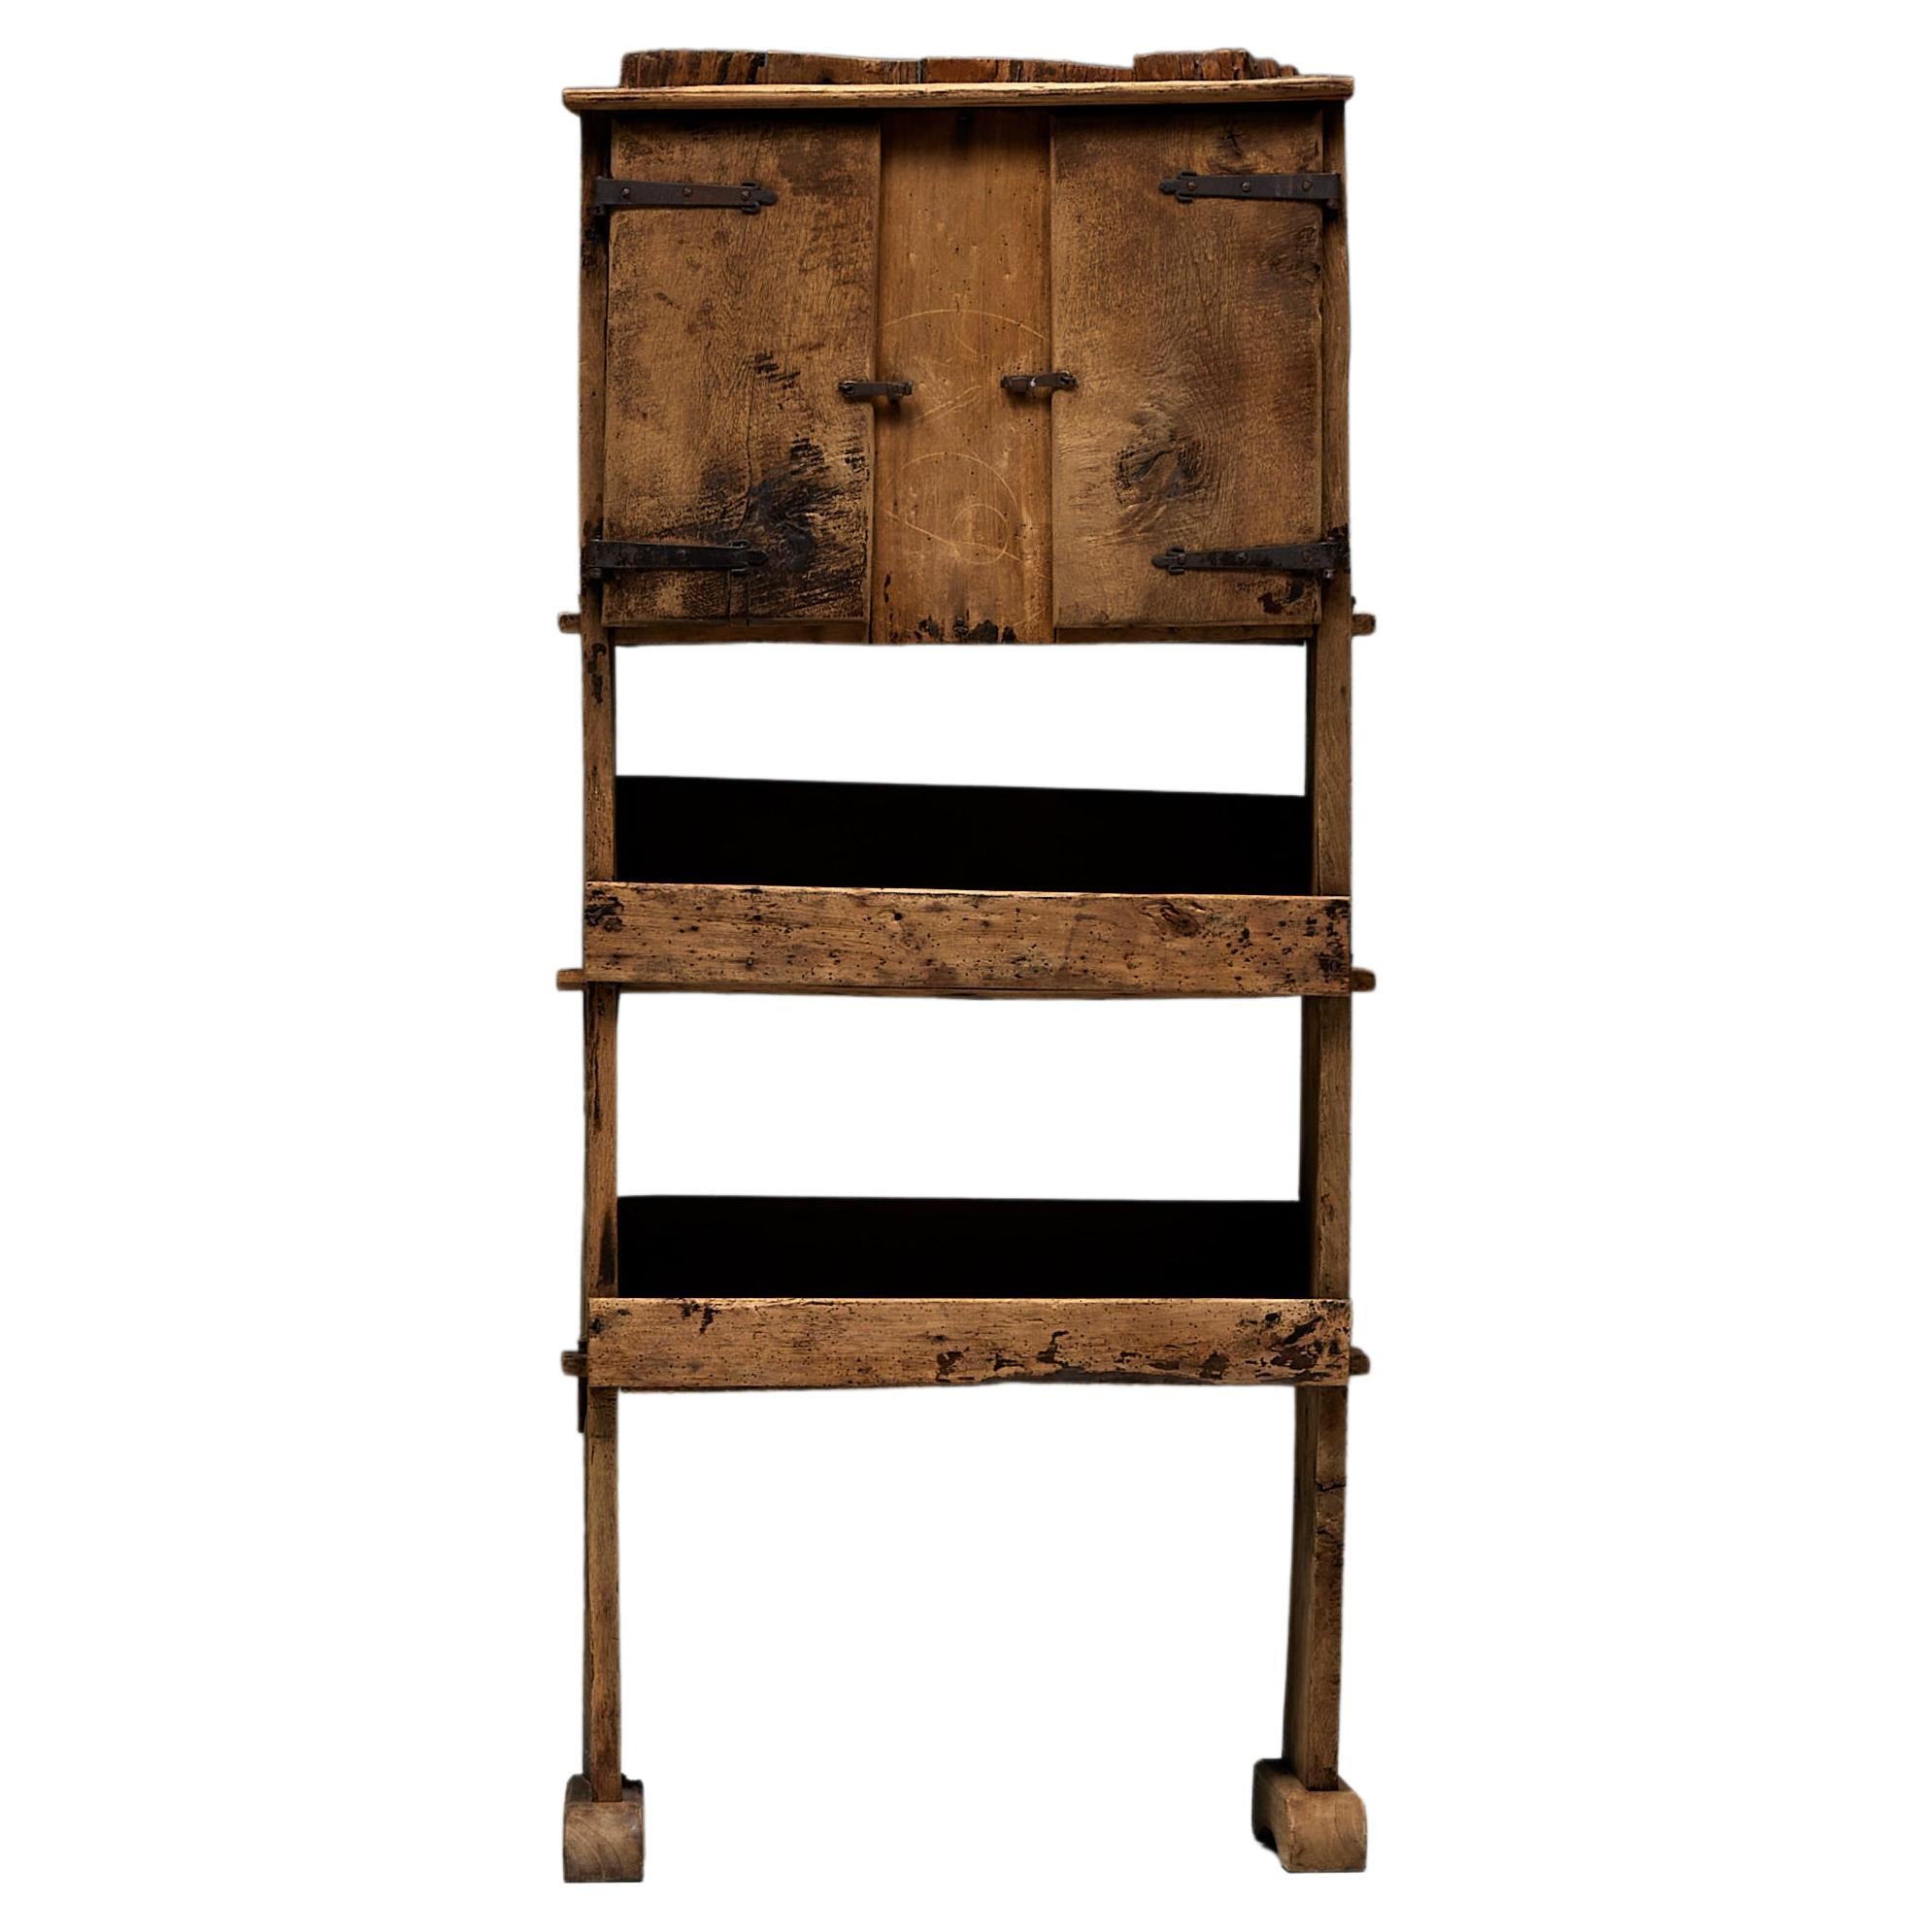 Rustic Art Populaire Sideboard, France, Mid-20th Century For Sale